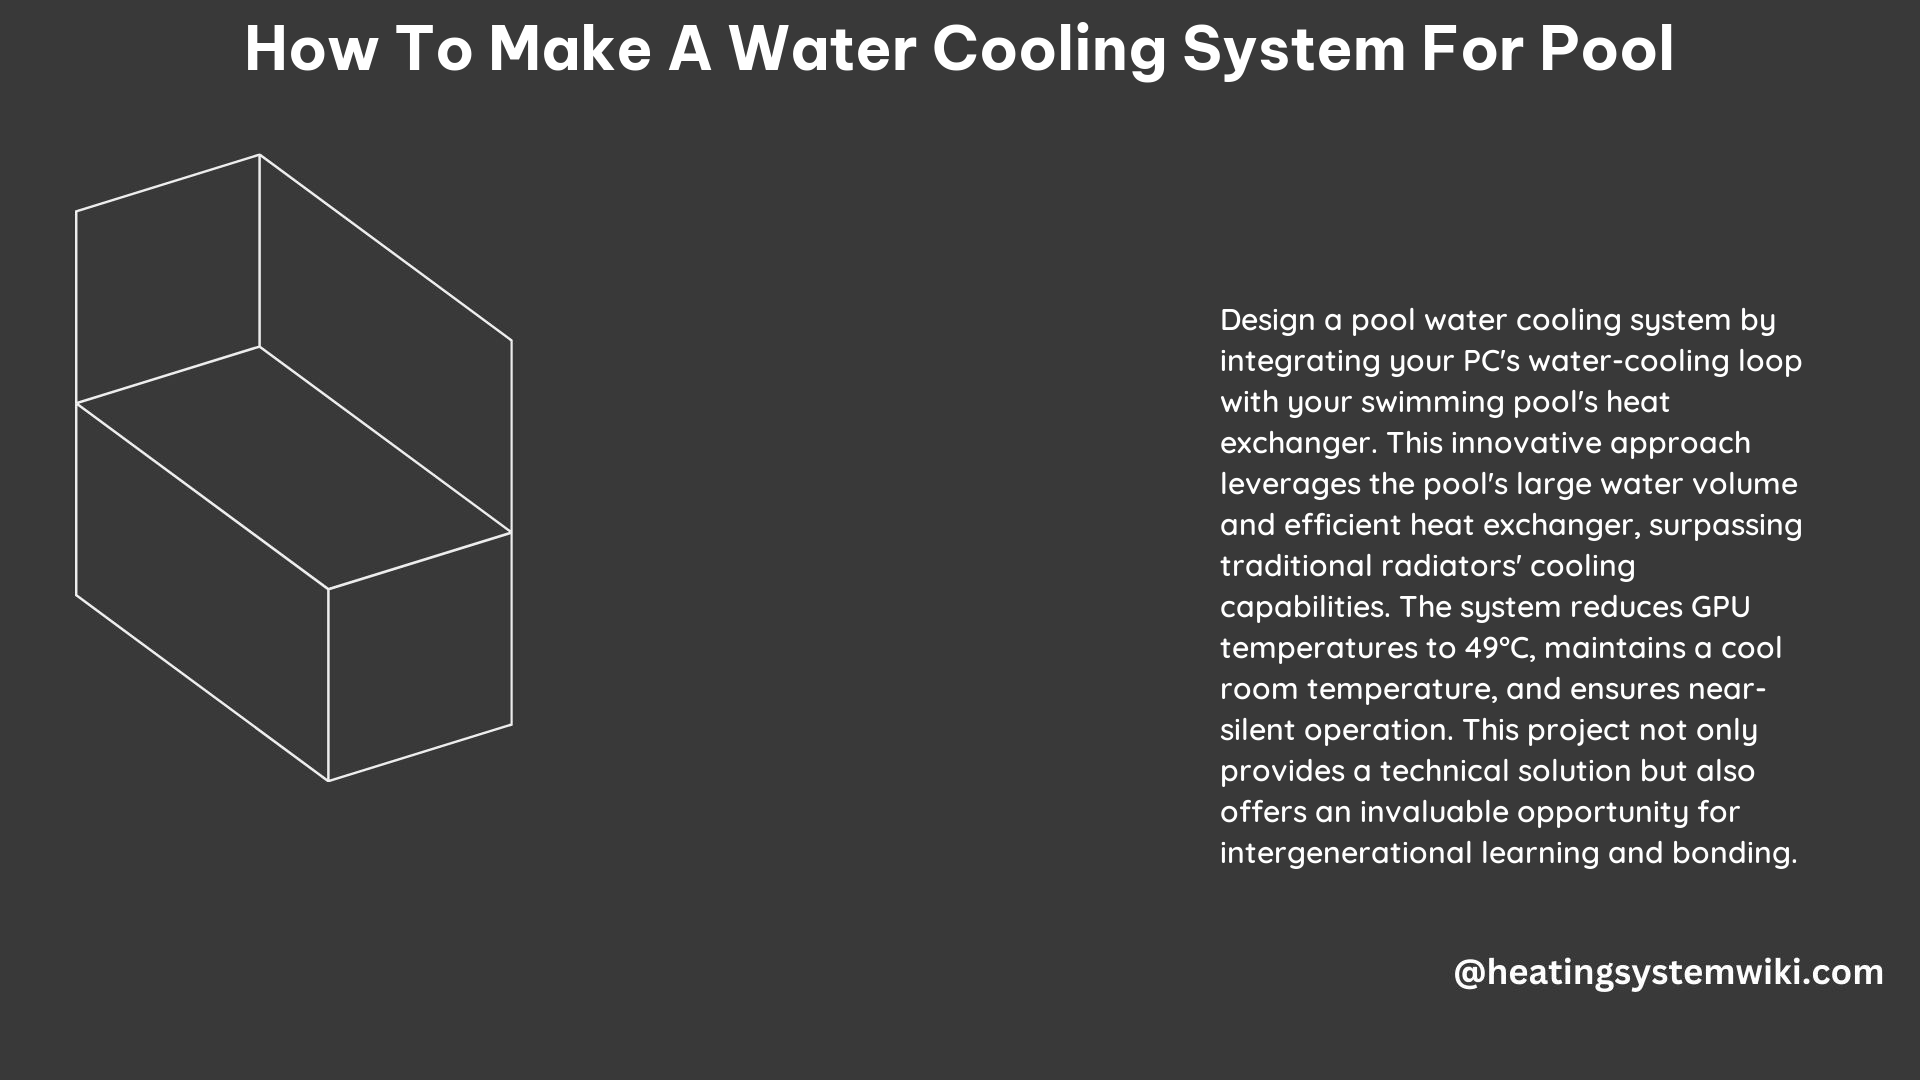 How to Make a Water Cooling System for Pool